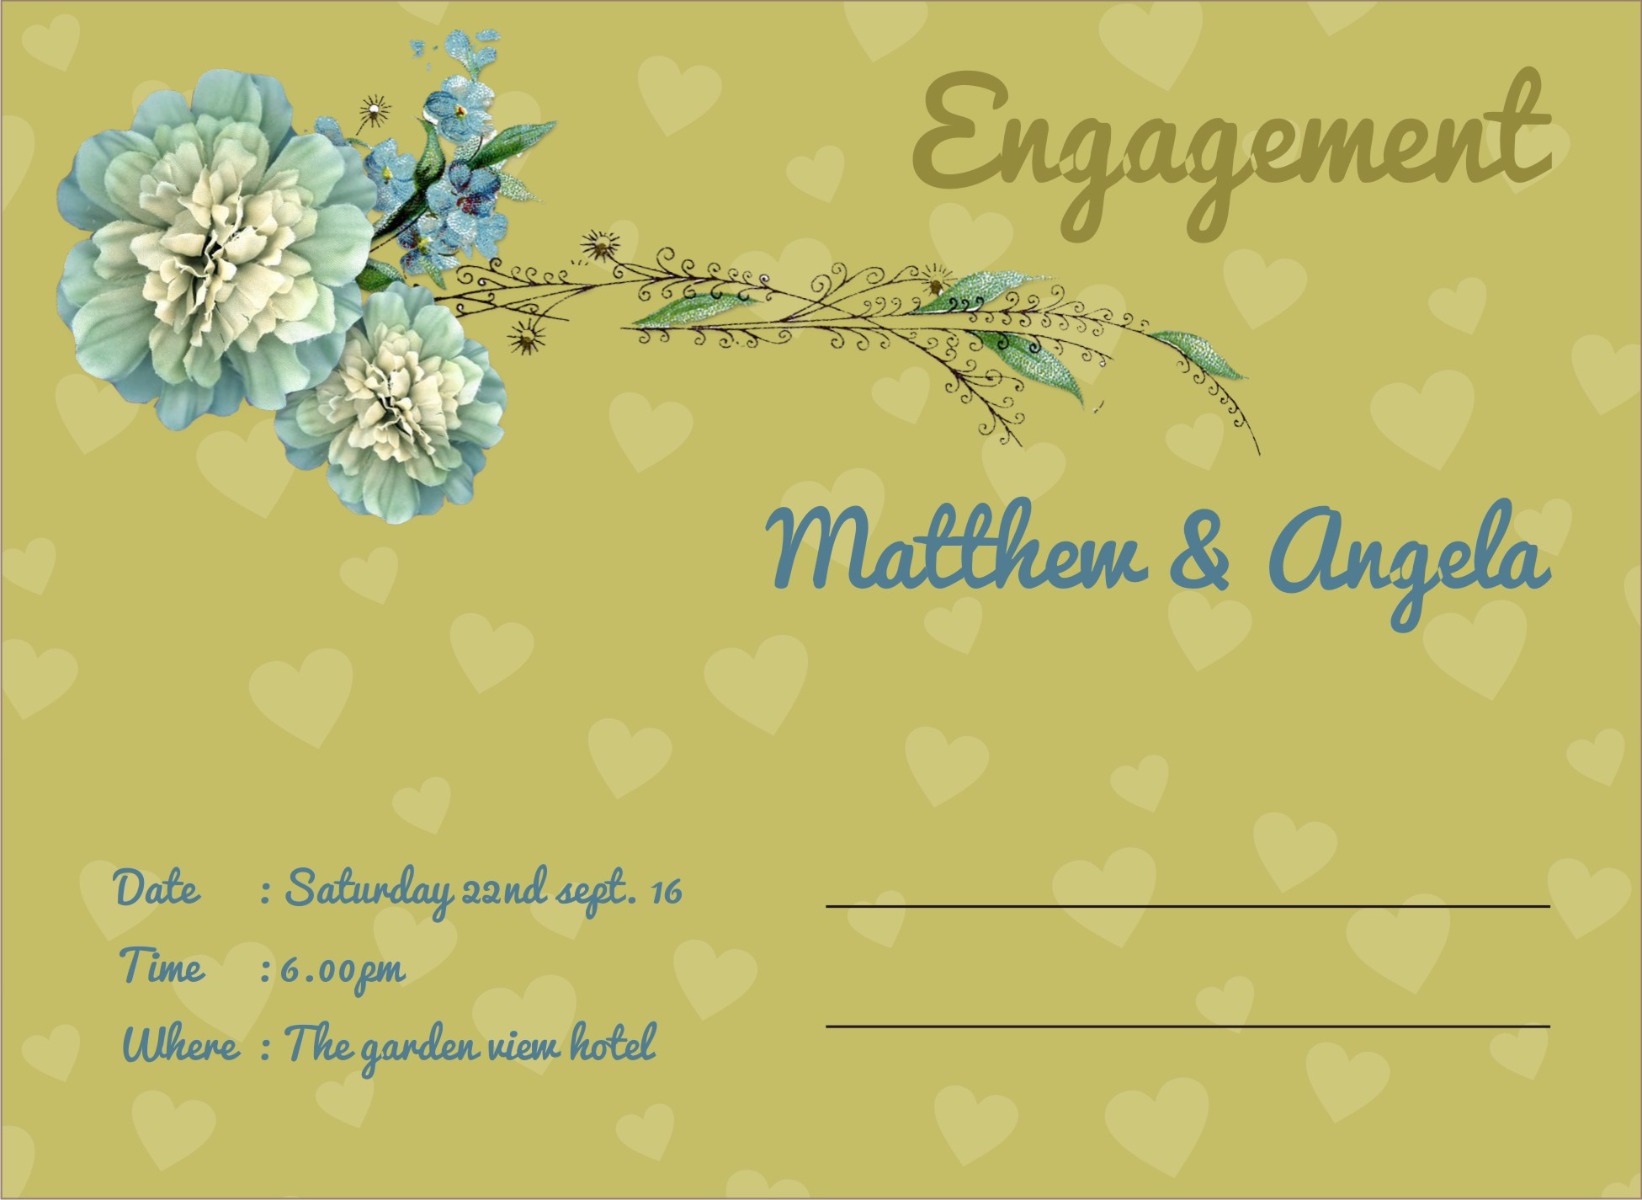 Invitation Card for Engagement